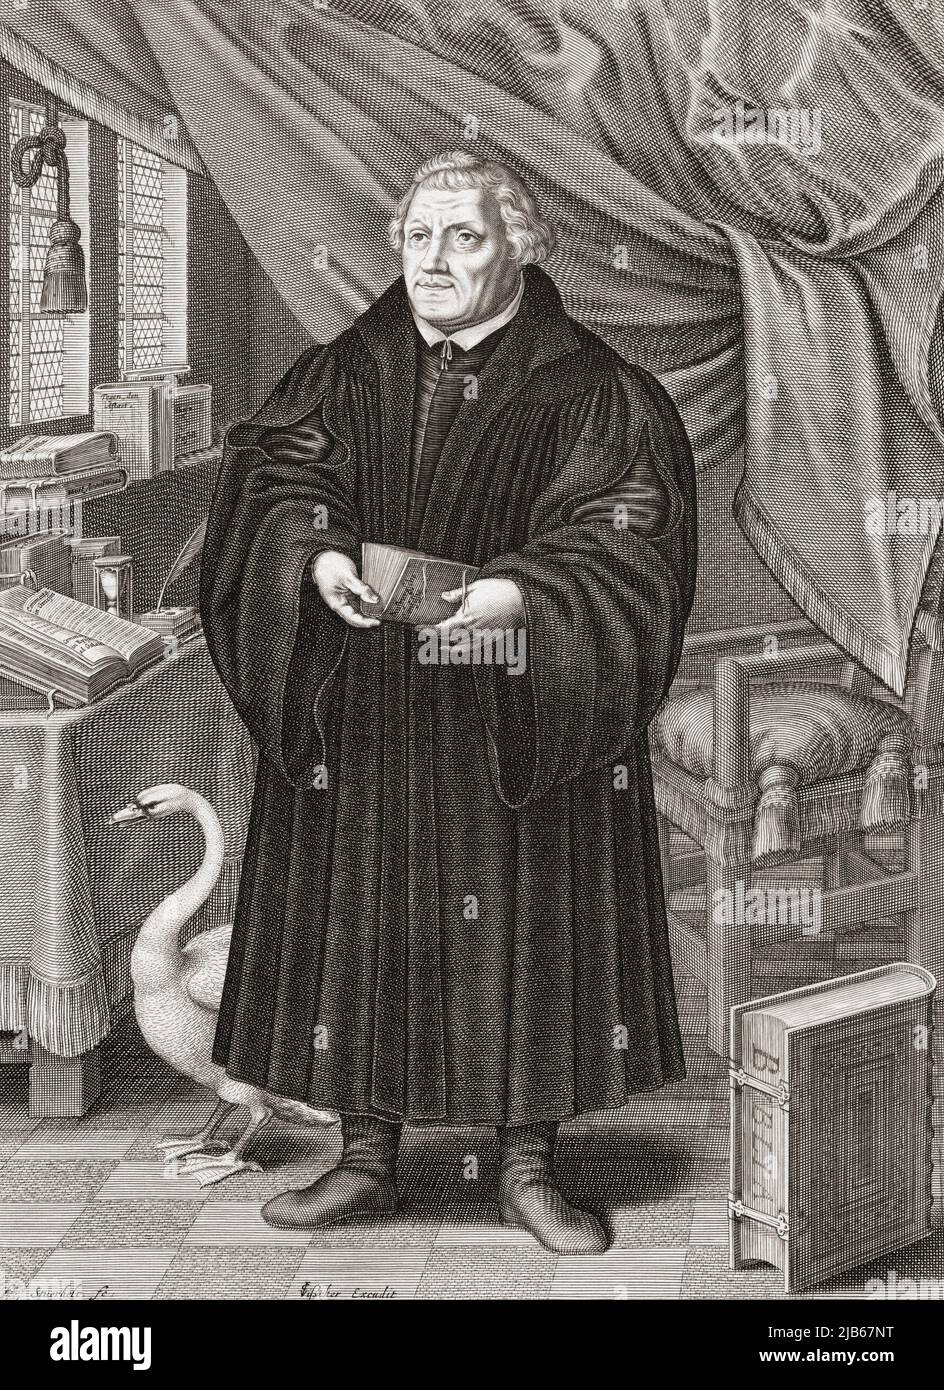 Martin Luther, 1483 - 1546. German professor of theology, composer, priest, monk. Instrumental in the Protestant Reformation. After an engraving by Stock Photo